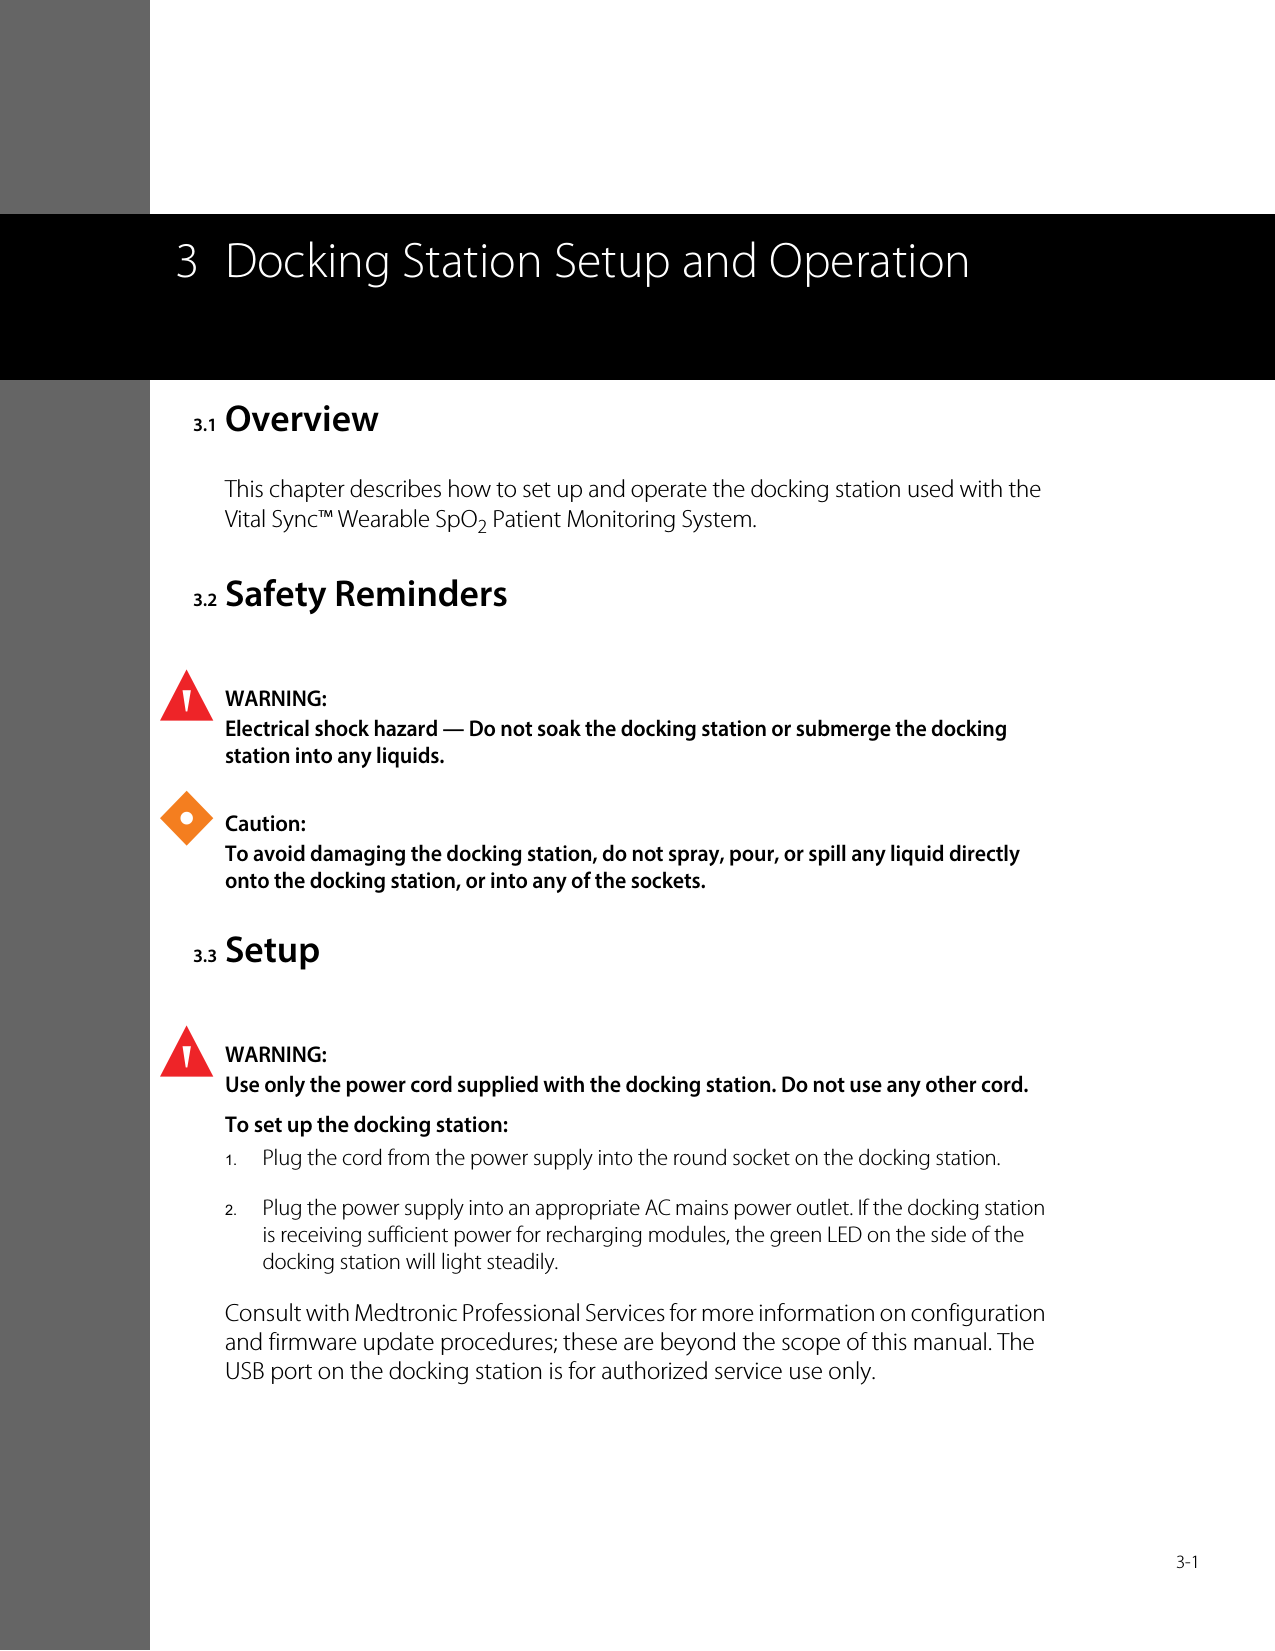  3-13 Docking Station Setup and Operation3.1 OverviewThis chapter describes how to set up and operate the docking station used with the Vital Sync™ Wearable SpO2 Patient Monitoring System.3.2 Safety RemindersWARNING:Electrical shock hazard — Do not soak the docking station or submerge the docking station into any liquids.Caution:To avoid damaging the docking station, do not spray, pour, or spill any liquid directly onto the docking station, or into any of the sockets.3.3 SetupWARNING:Use only the power cord supplied with the docking station. Do not use any other cord.To set up the docking station:1.Plug the cord from the power supply into the round socket on the docking station.2.Plug the power supply into an appropriate AC mains power outlet. If the docking station is receiving sufficient power for recharging modules, the green LED on the side of the docking station will light steadily.Consult with Medtronic Professional Services for more information on configuration and firmware update procedures; these are beyond the scope of this manual. The USB port on the docking station is for authorized service use only.